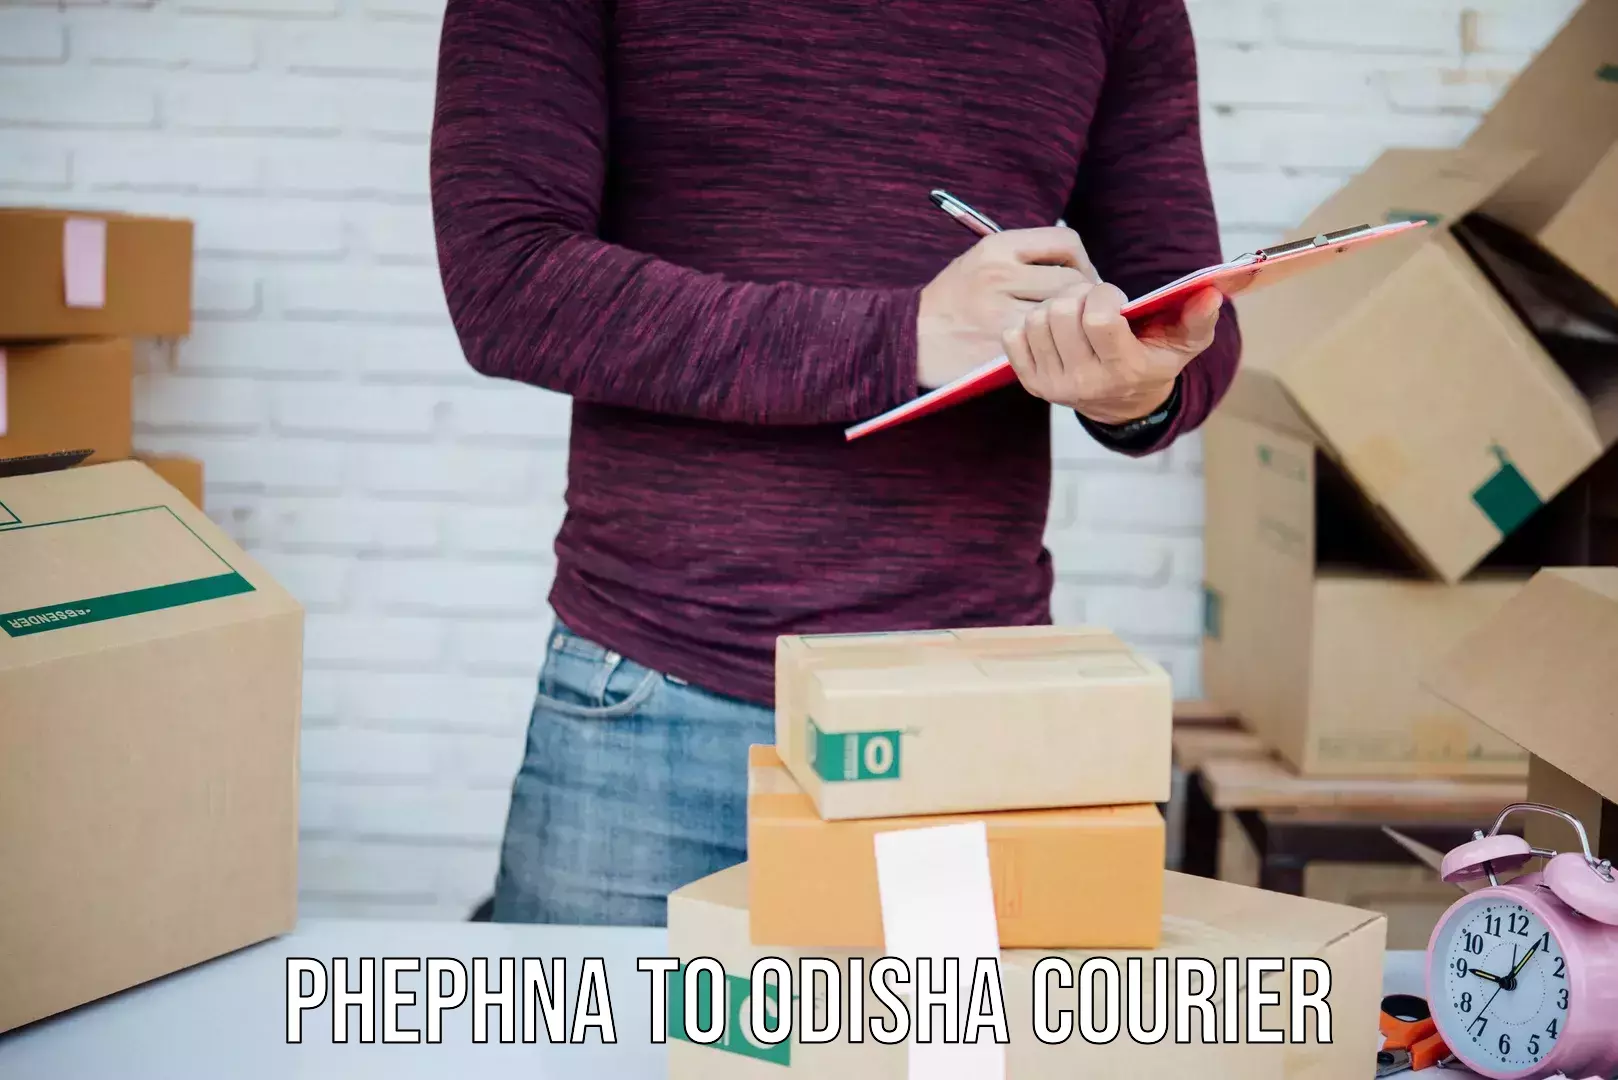 Residential courier service in Phephna to Turanga